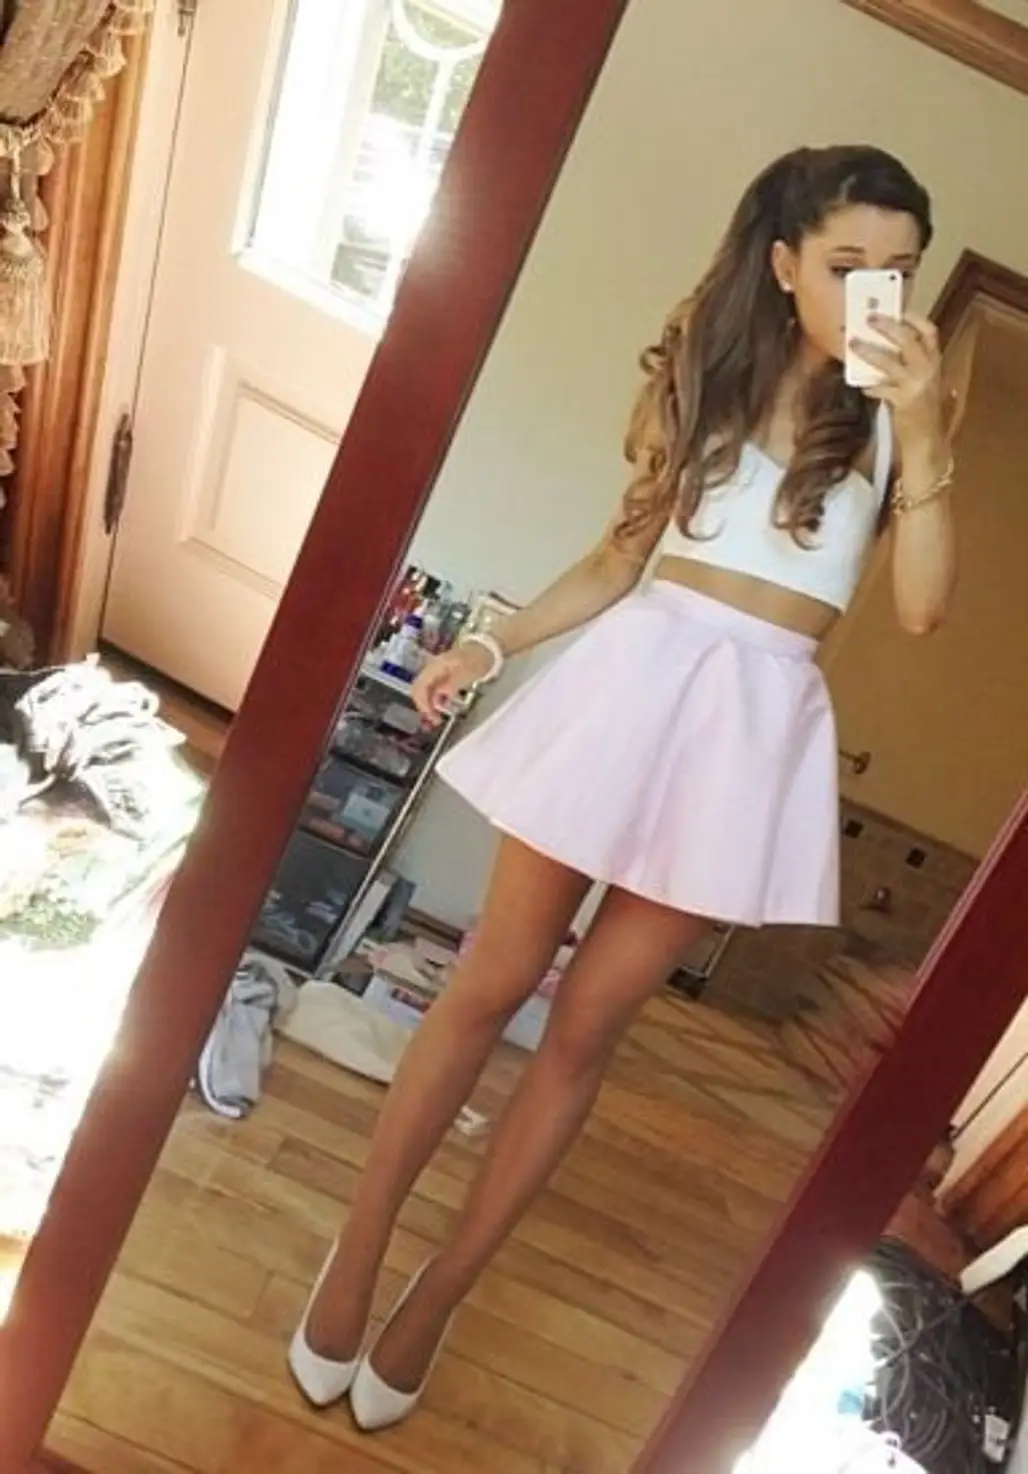 Arianna Grande! She Has the Best Body Ever! I Wish I Had Her Legs and Arms and Waist! so Pretty!